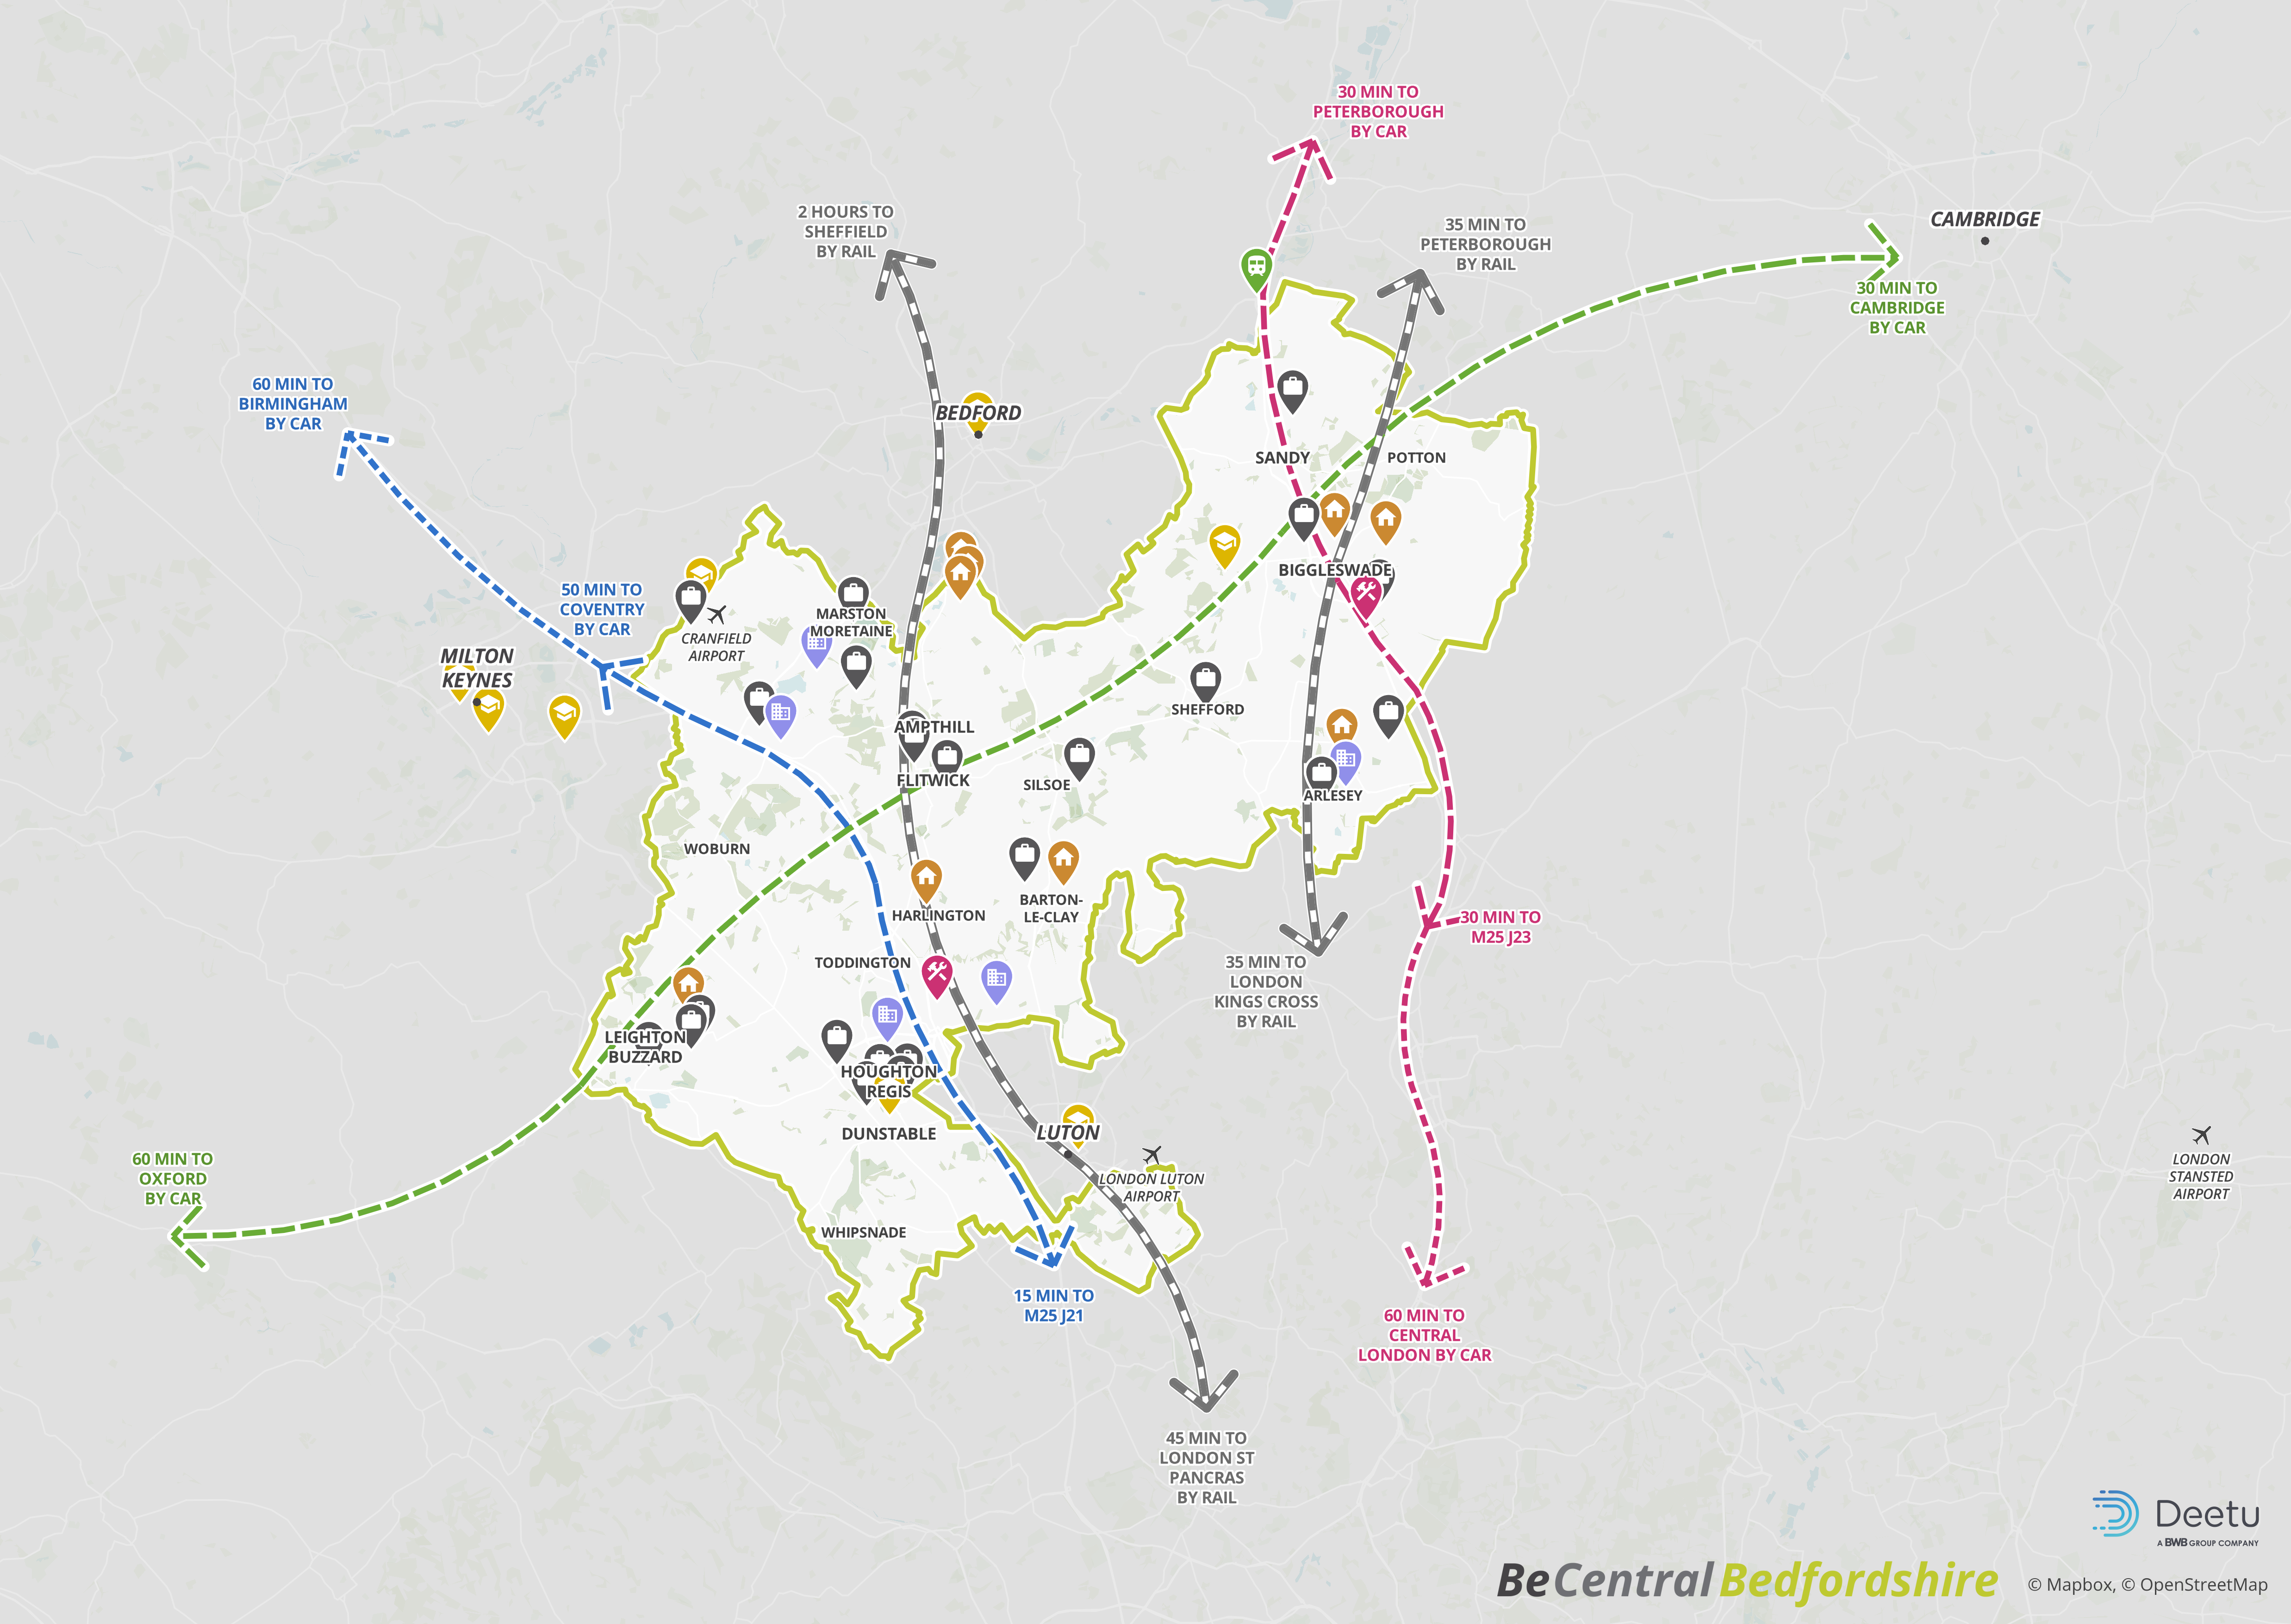 New interactive map for Be Central Bedfordshire